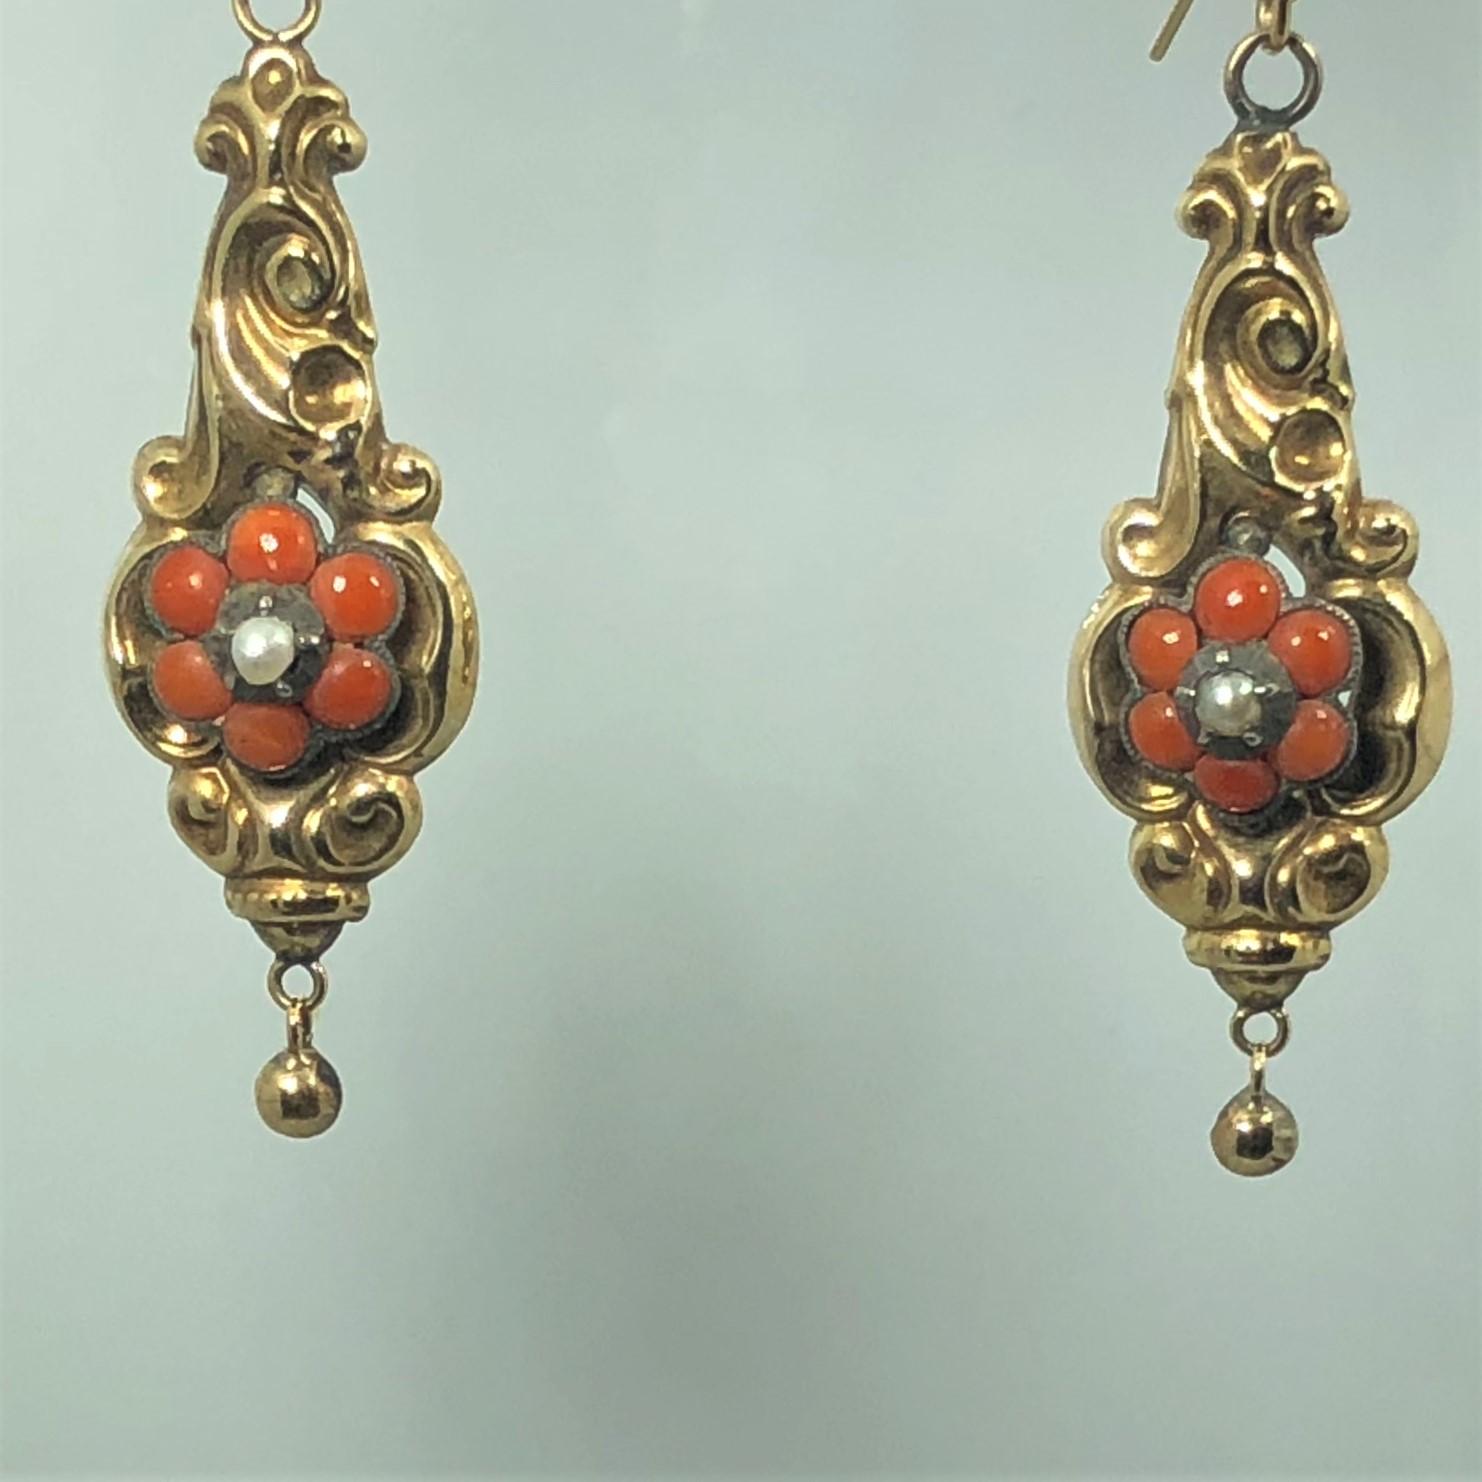 Antique Victorian Yellow Gold Coral and Seed Pearl Earrings. These magnificent true antique/Victorian earrings are created in approx. 15 karat yellow gold, weight 4.2 grams. Adorned with 12 red coral - 6 round cut coral on each piece, and 2 round